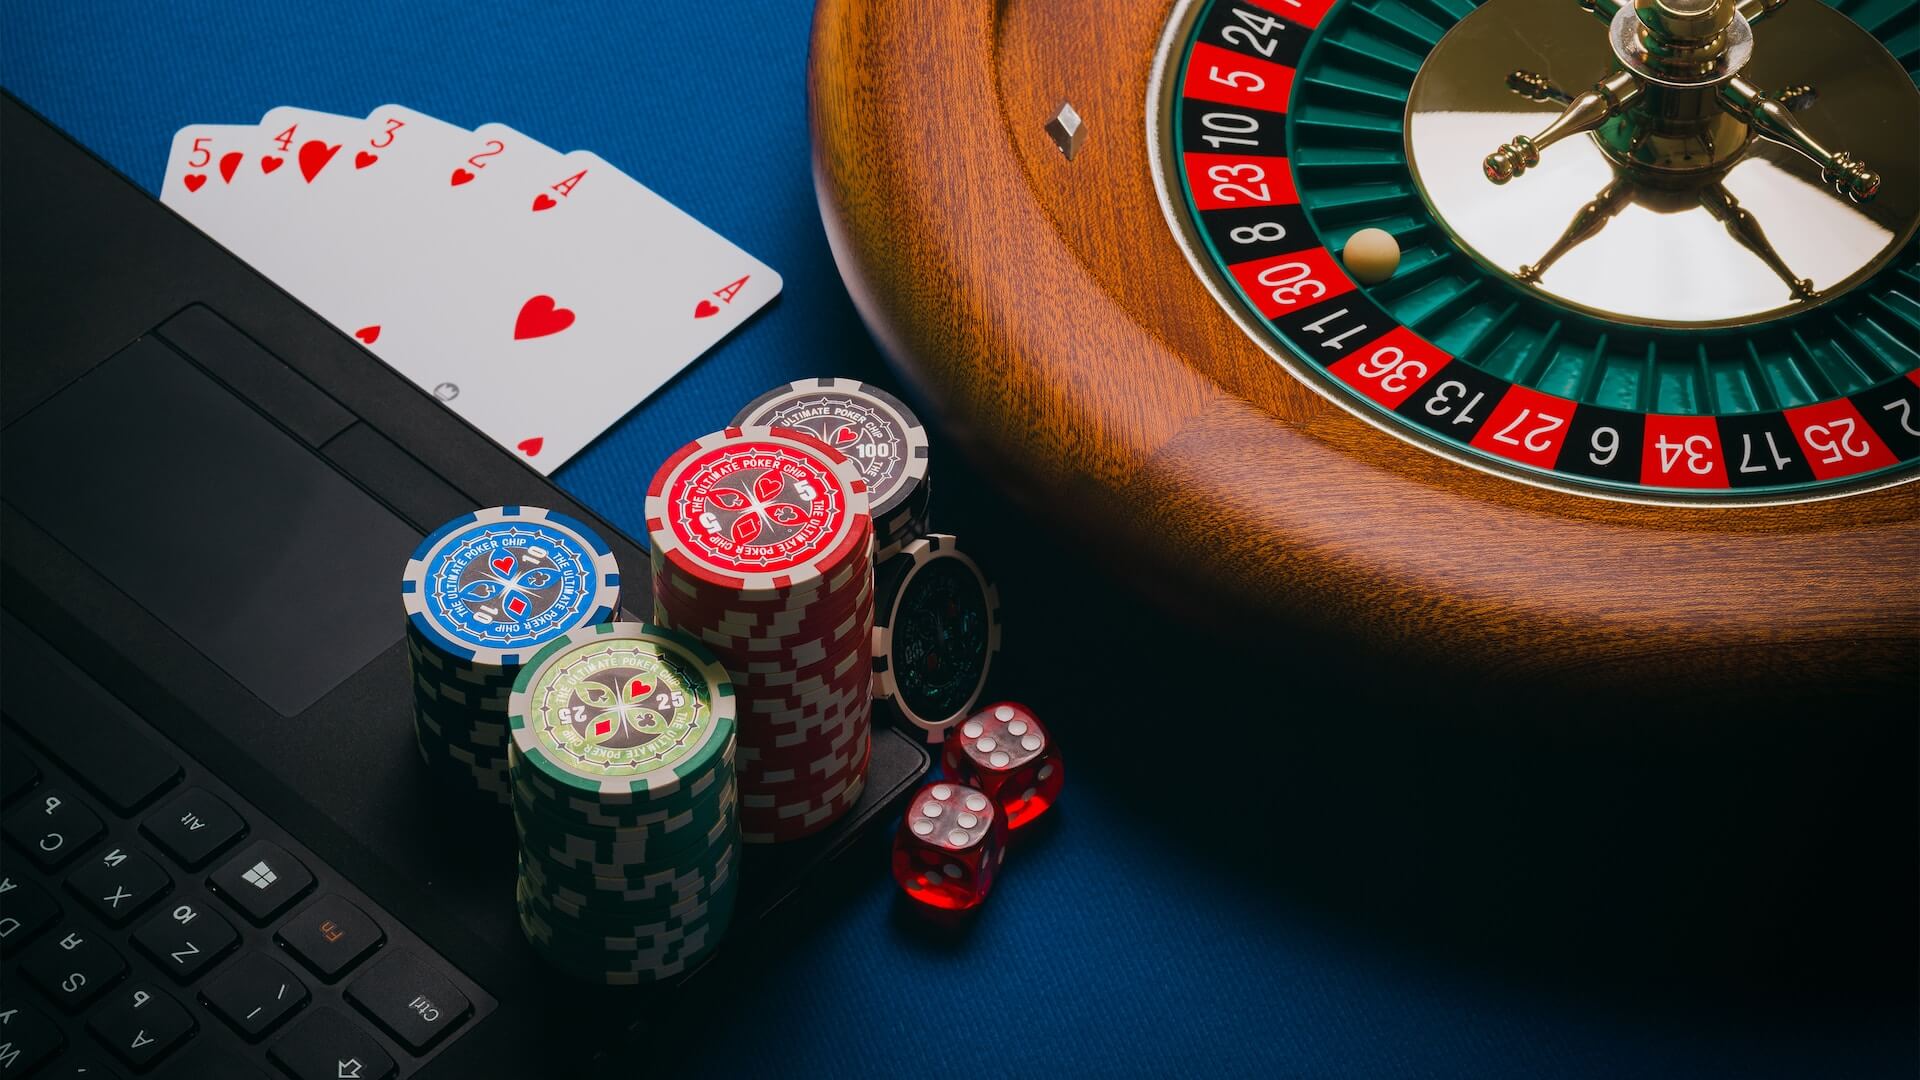 A laptop next to a roulette wheel, surrounded by poker chips, dice, and playing cards